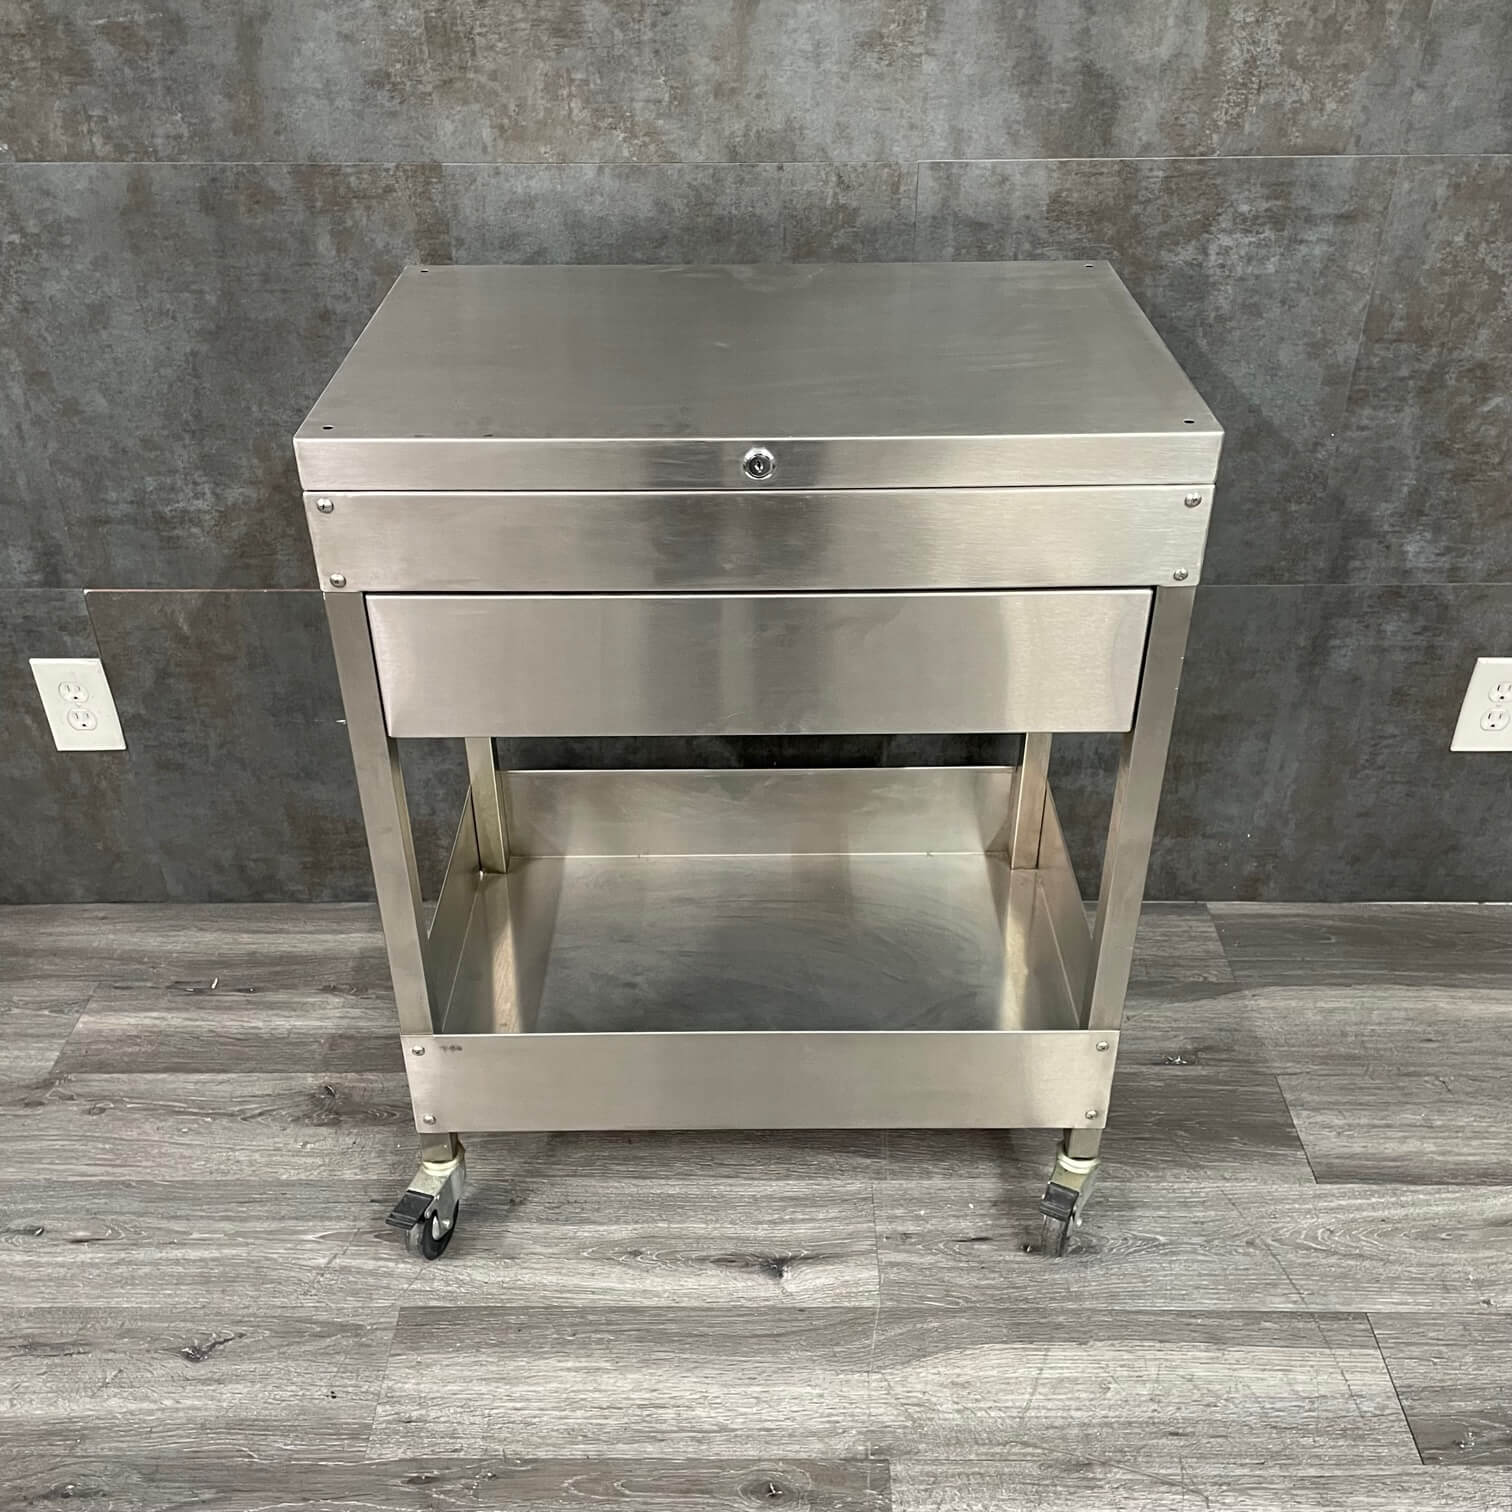 Stainless Steel Medical Cart with Storage